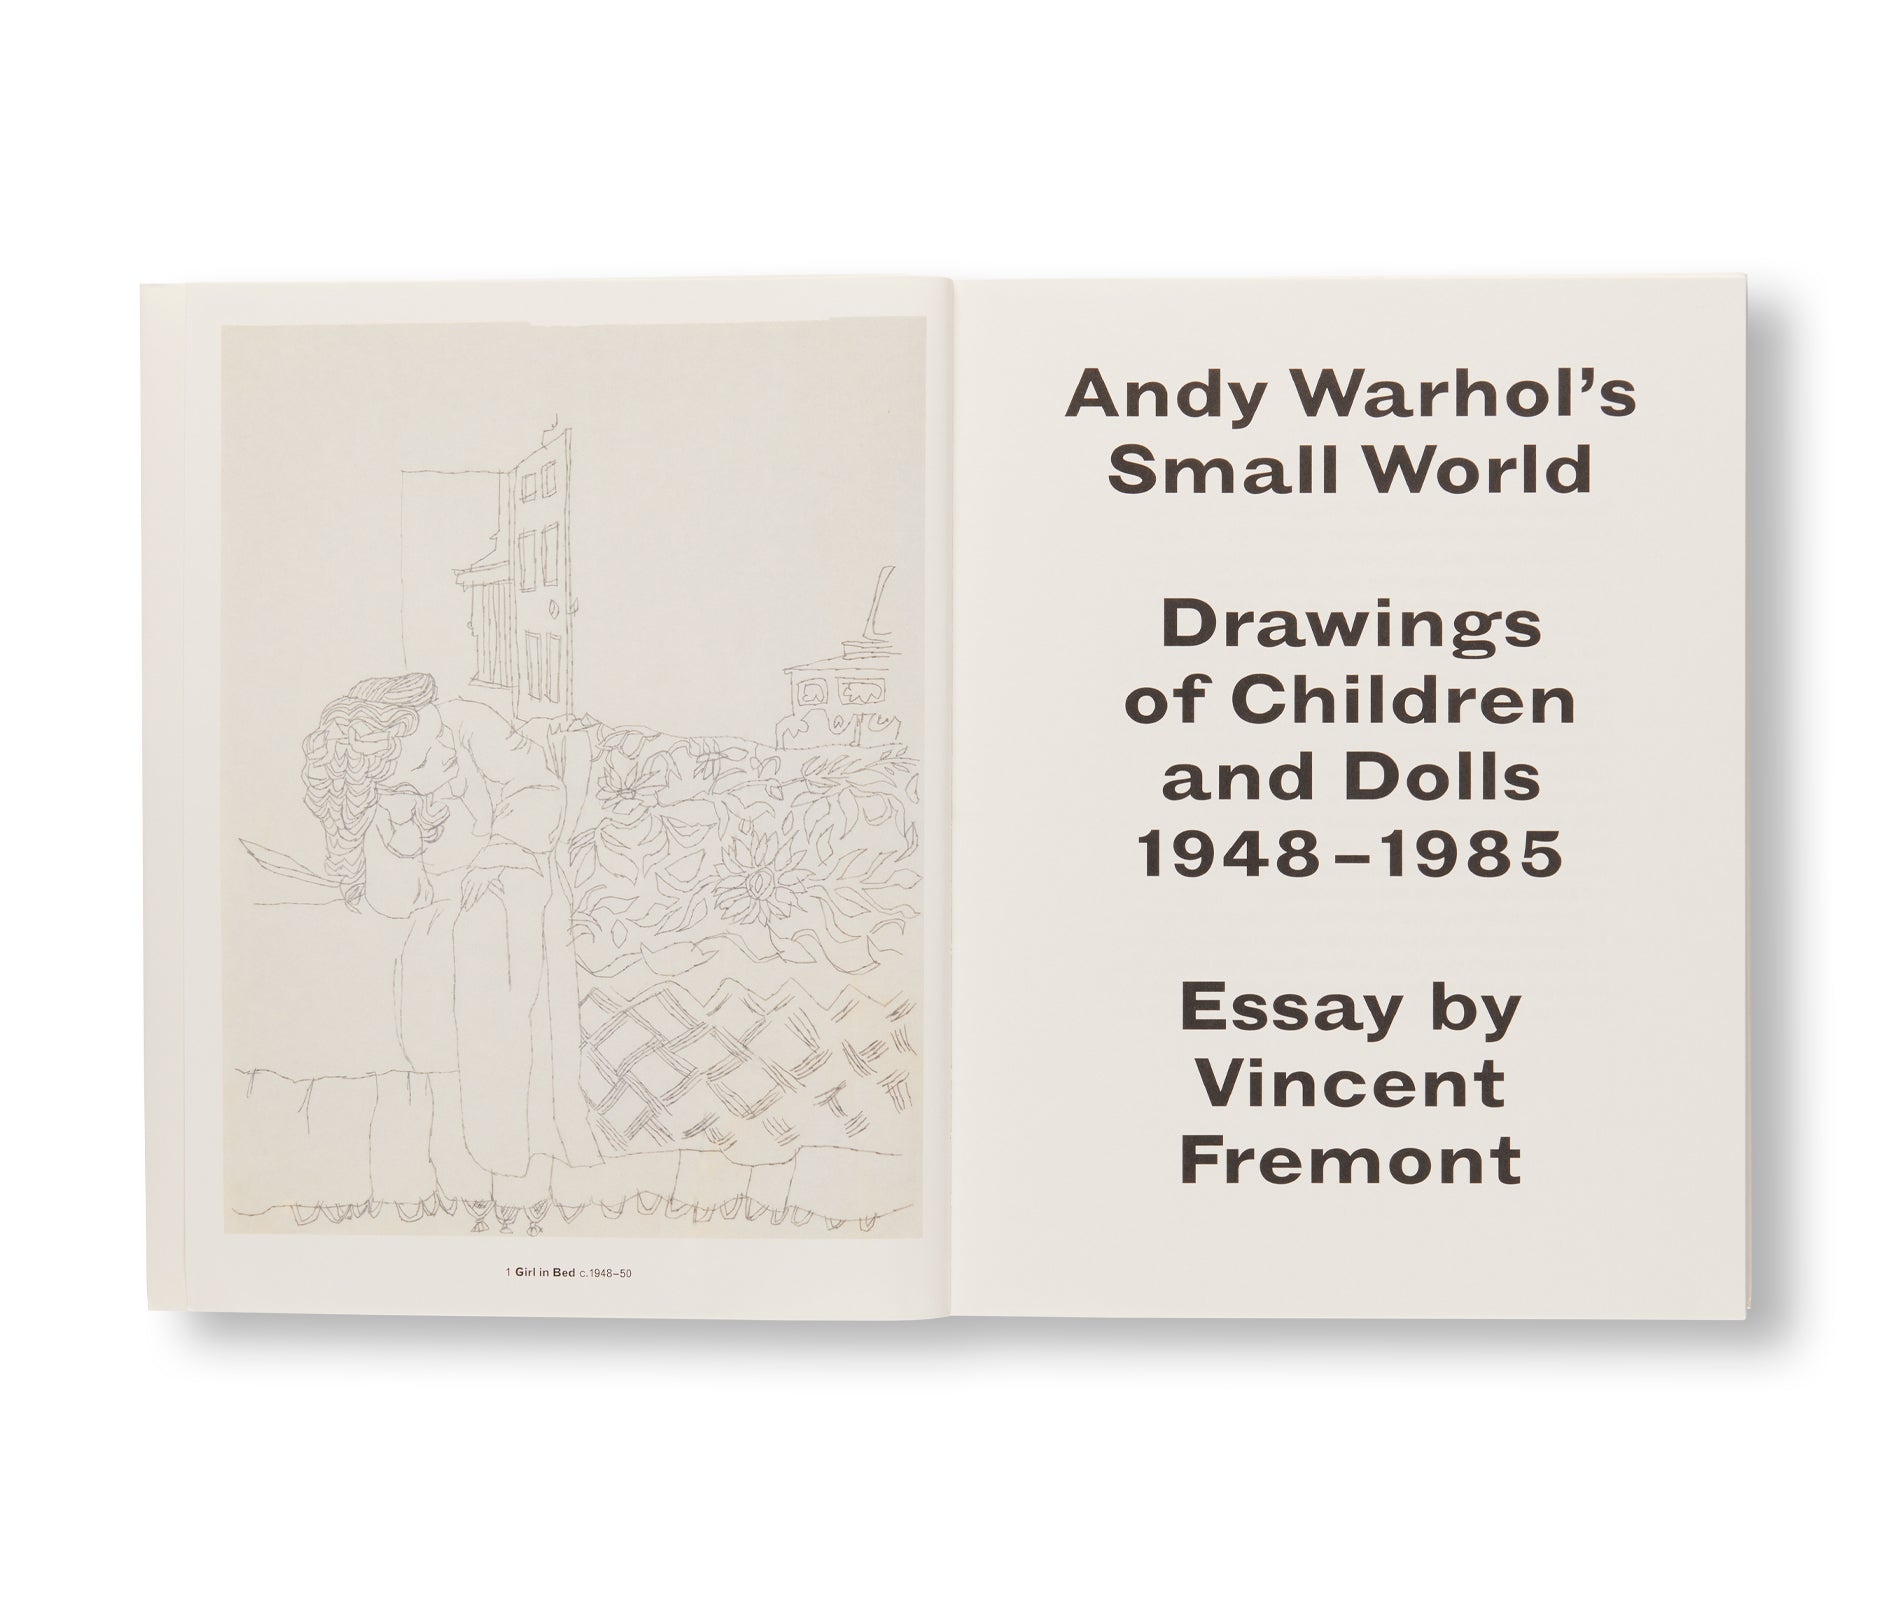 ANDY WARHOL'S SMALL WORLD by Andy Warhol